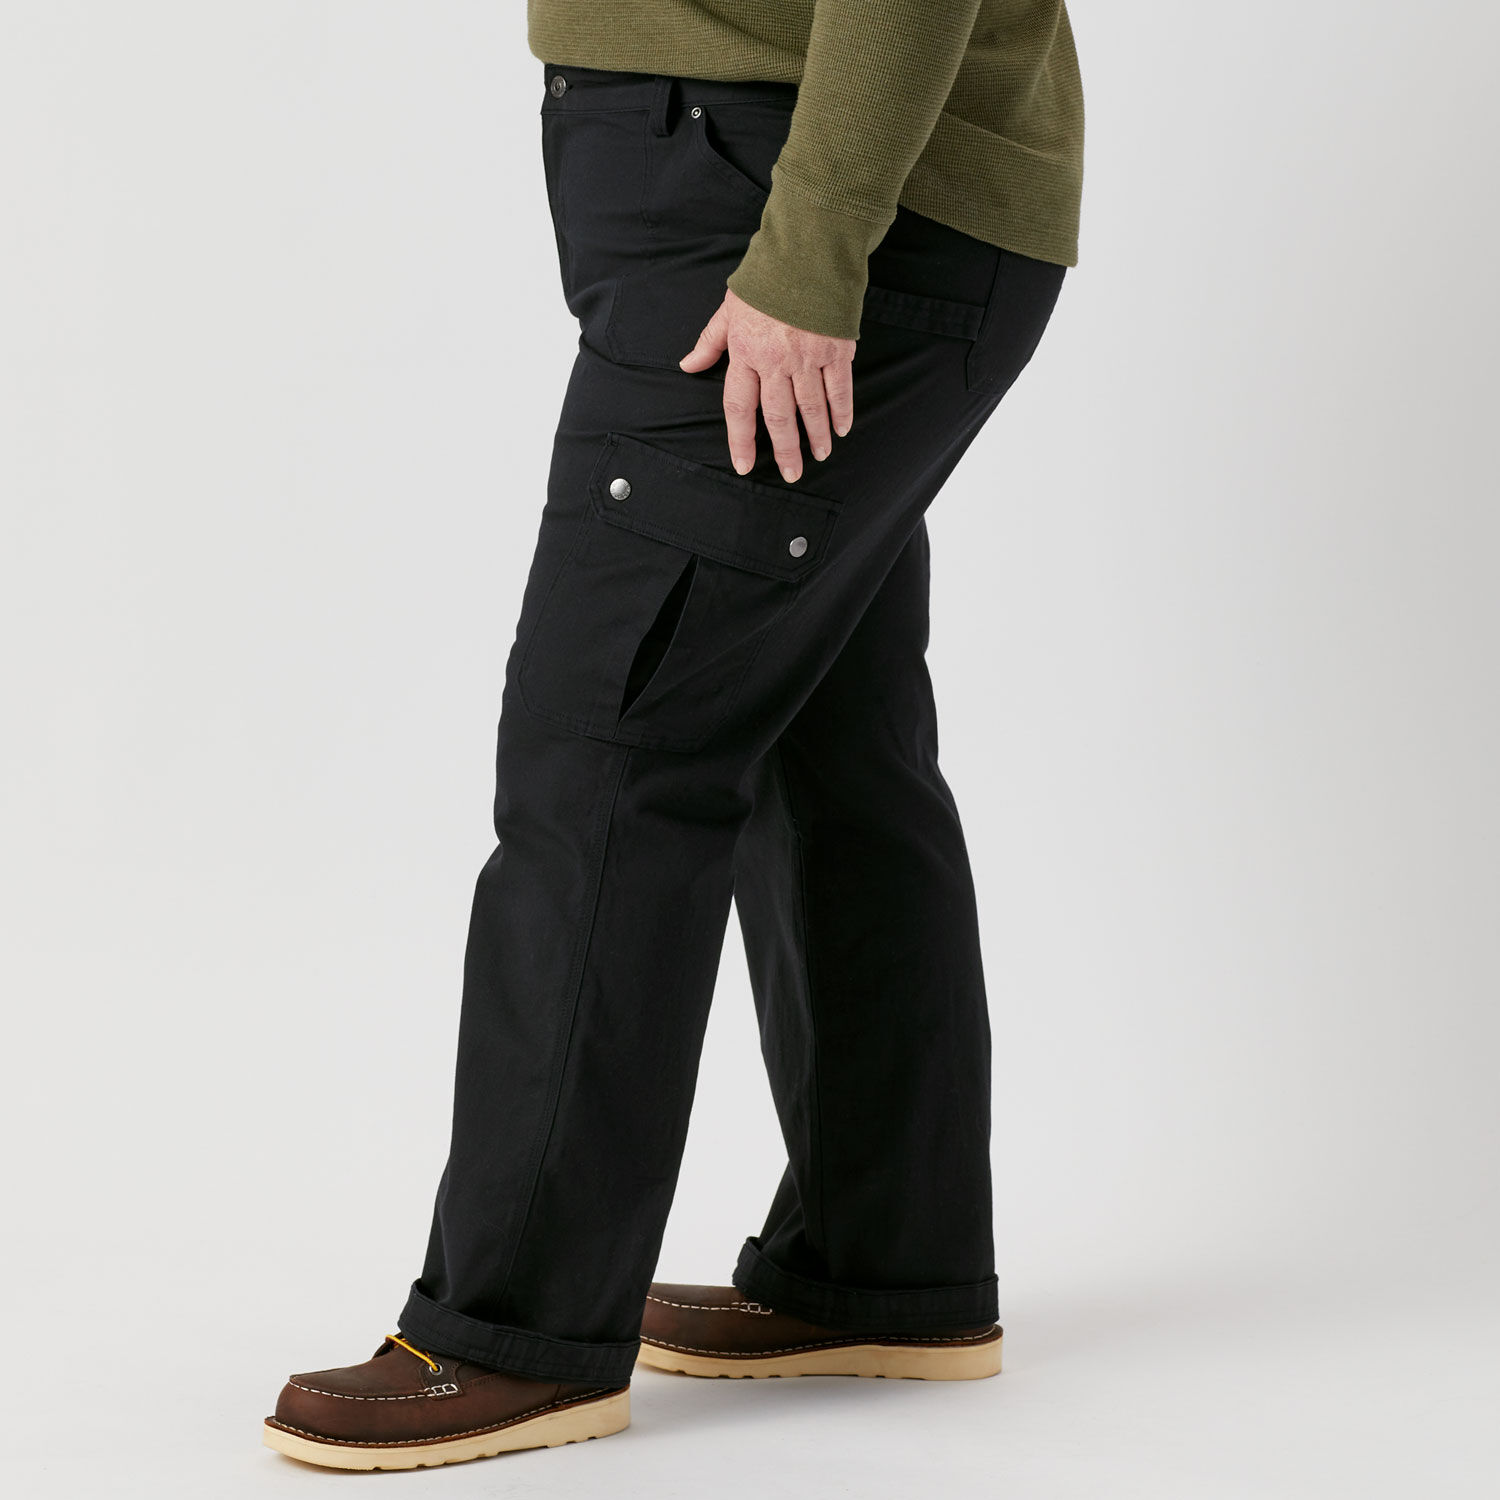 Comfy Cargo Sweatpants Women For Women With Low Waist, Wide Leg, Multi  Pockets, And Baggy Style Perfect For Work And Streetwear From Zhuangxi,  $19.32 | DHgate.Com